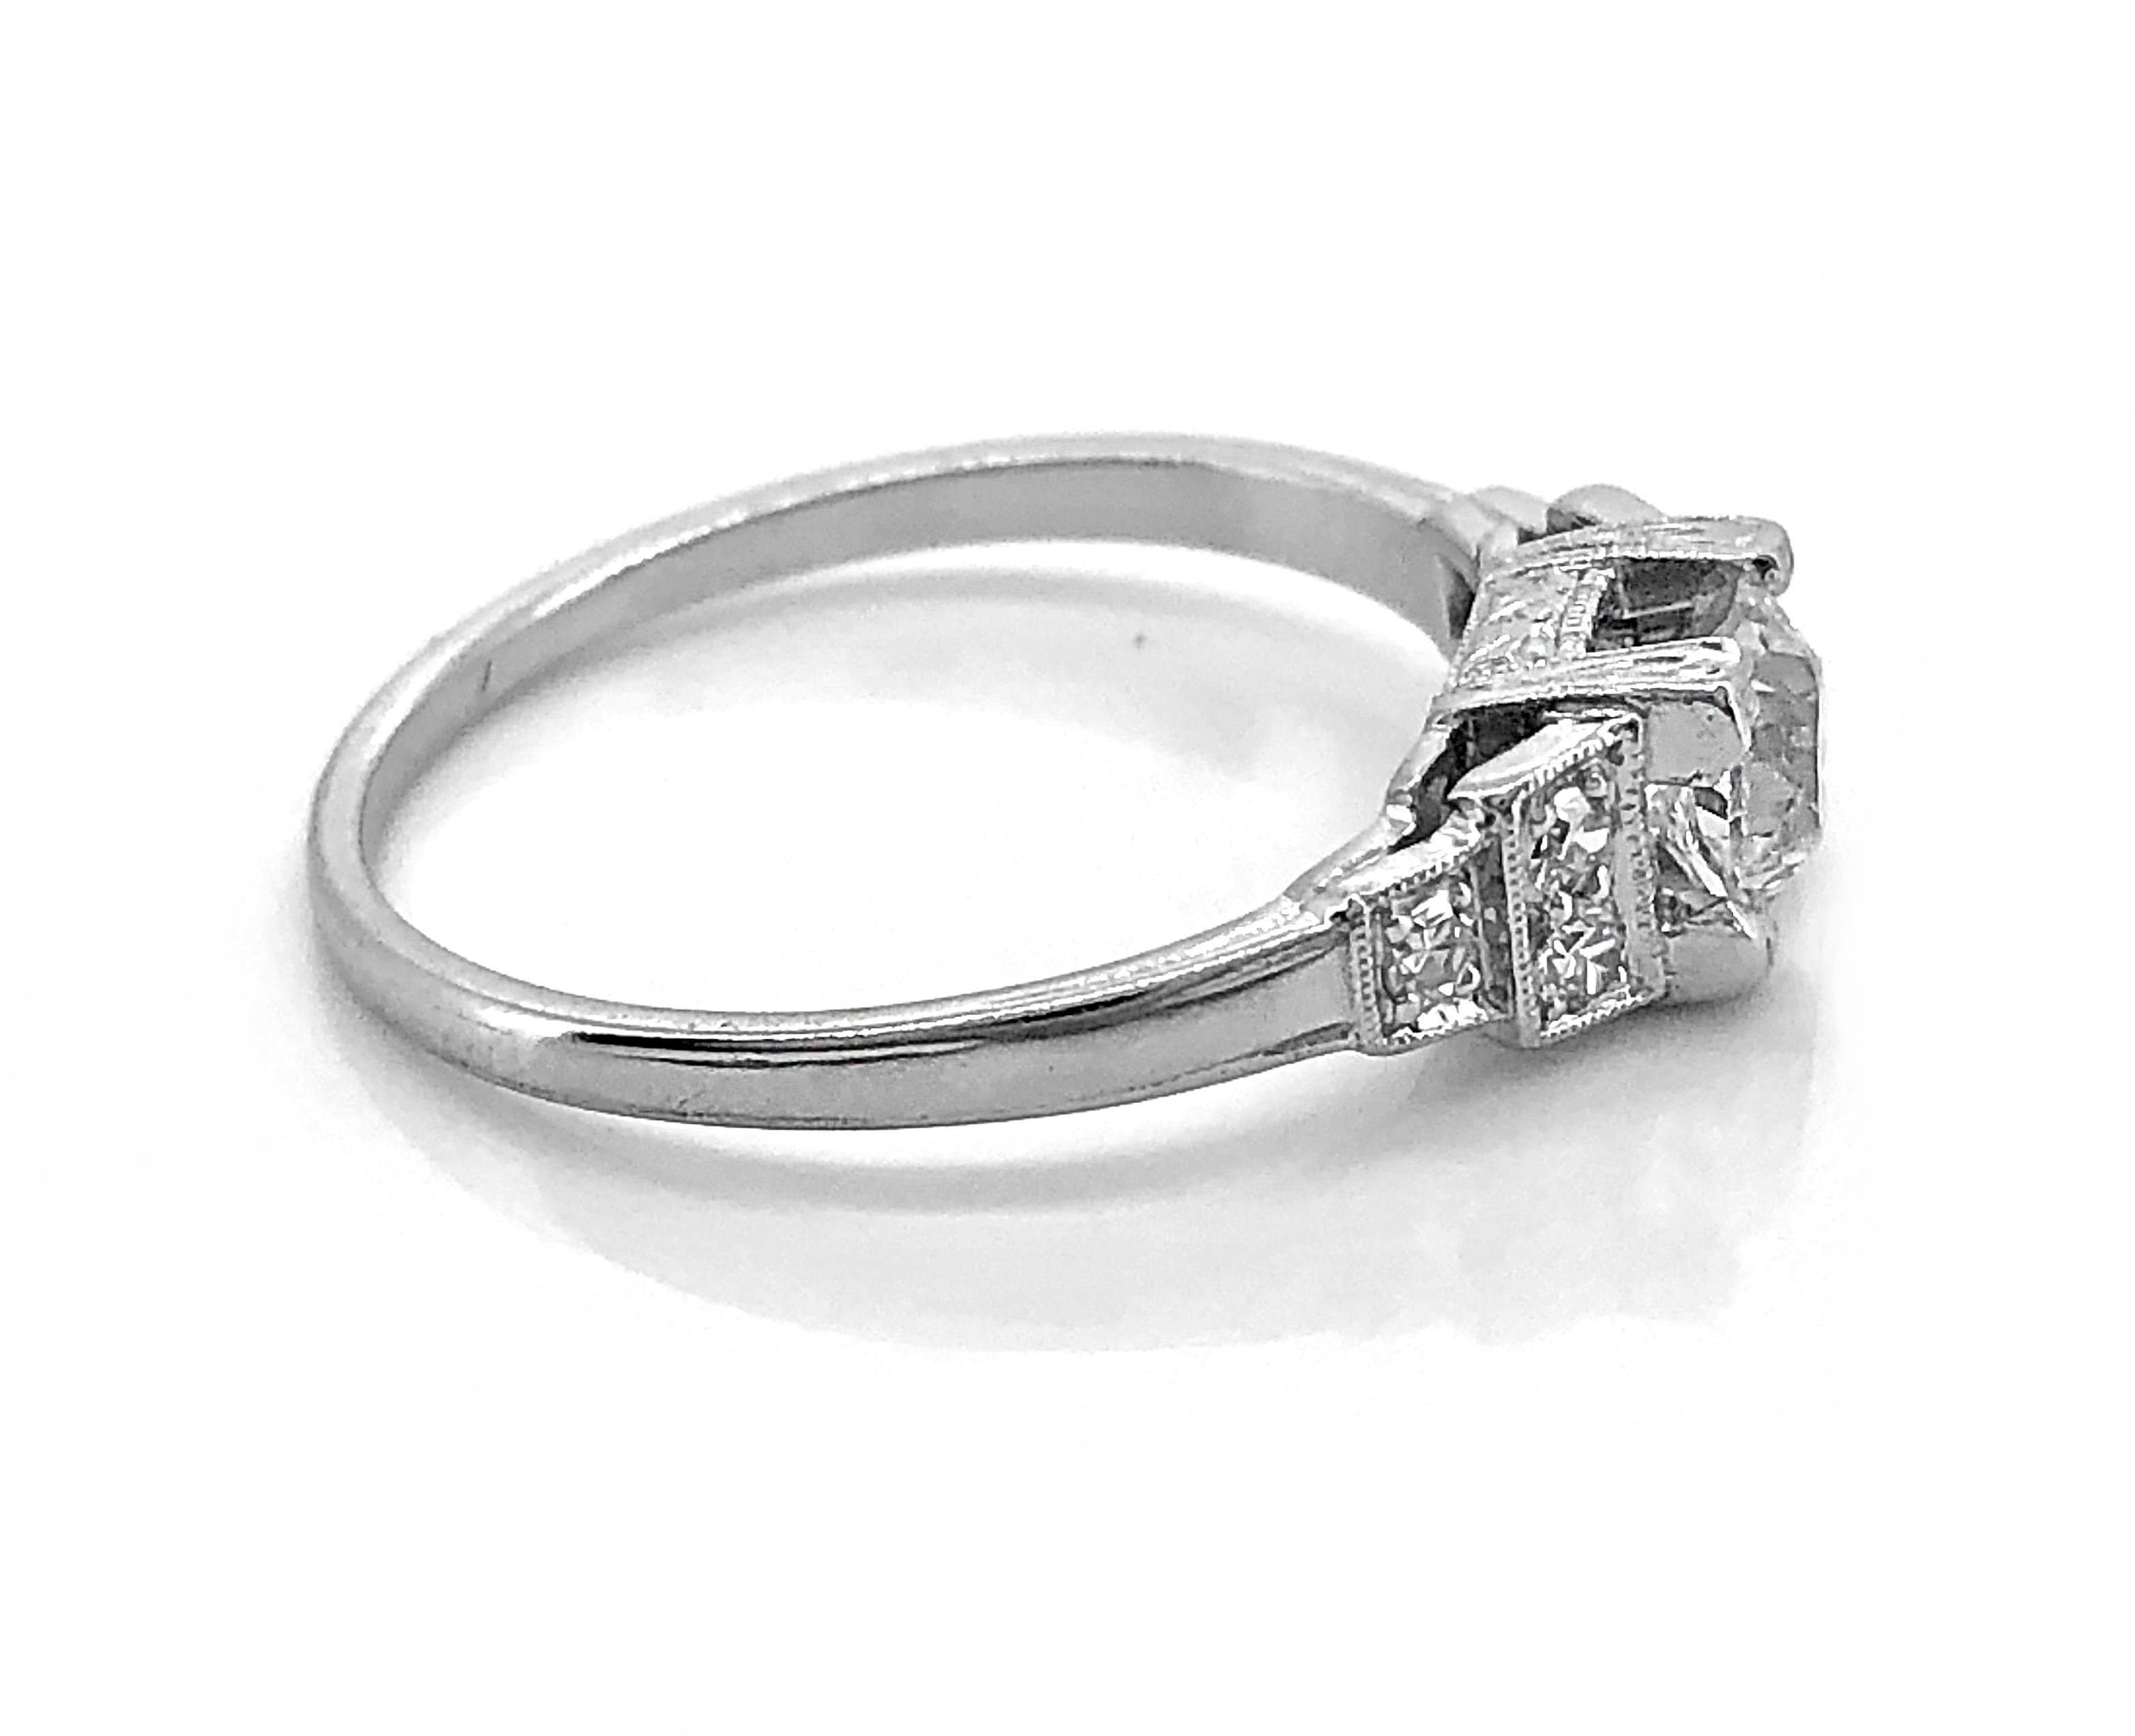 A beautiful Platinum Art Deco Antique engagement ring (Whitehouse Brothers) featuring a .47ct. Apx. European cut diamond with VS2 clarity and H color (GIA Certificate). Accenting the center diamond in a step down design are .12ct. Apx. T.W. of Old